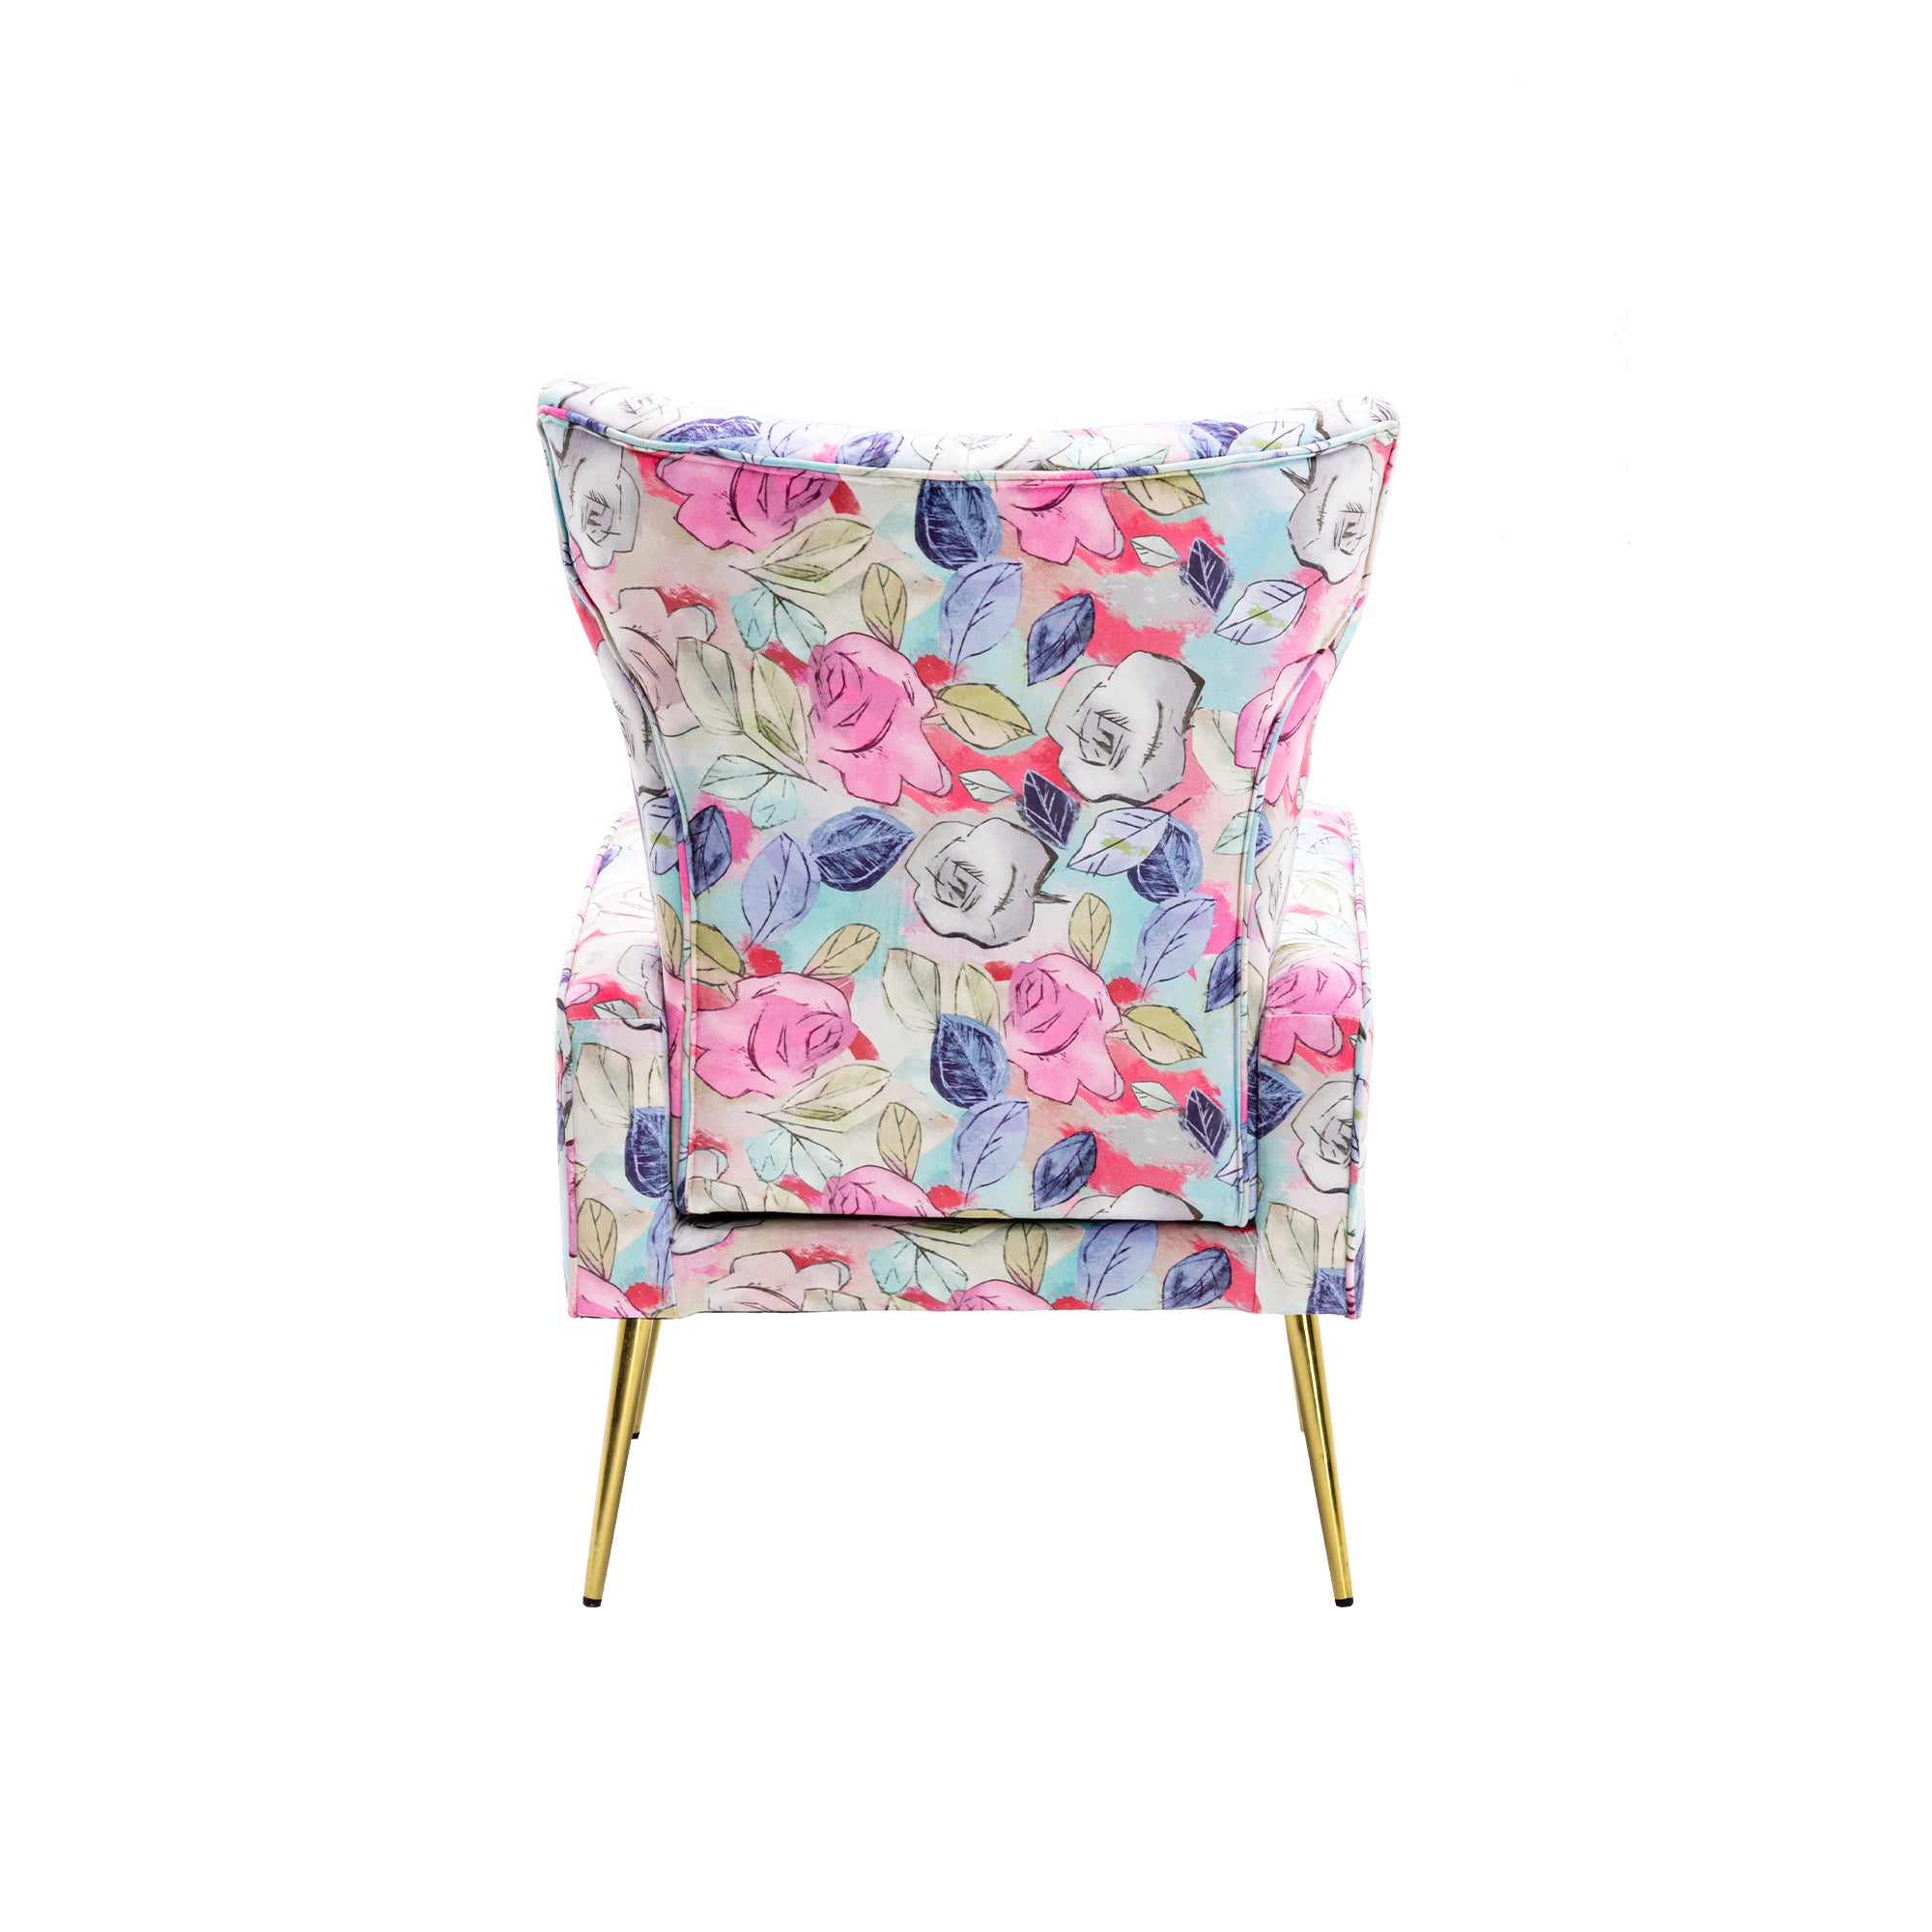 COOLMORE Accent Chair ,leisure single chair with Rose peach-metal